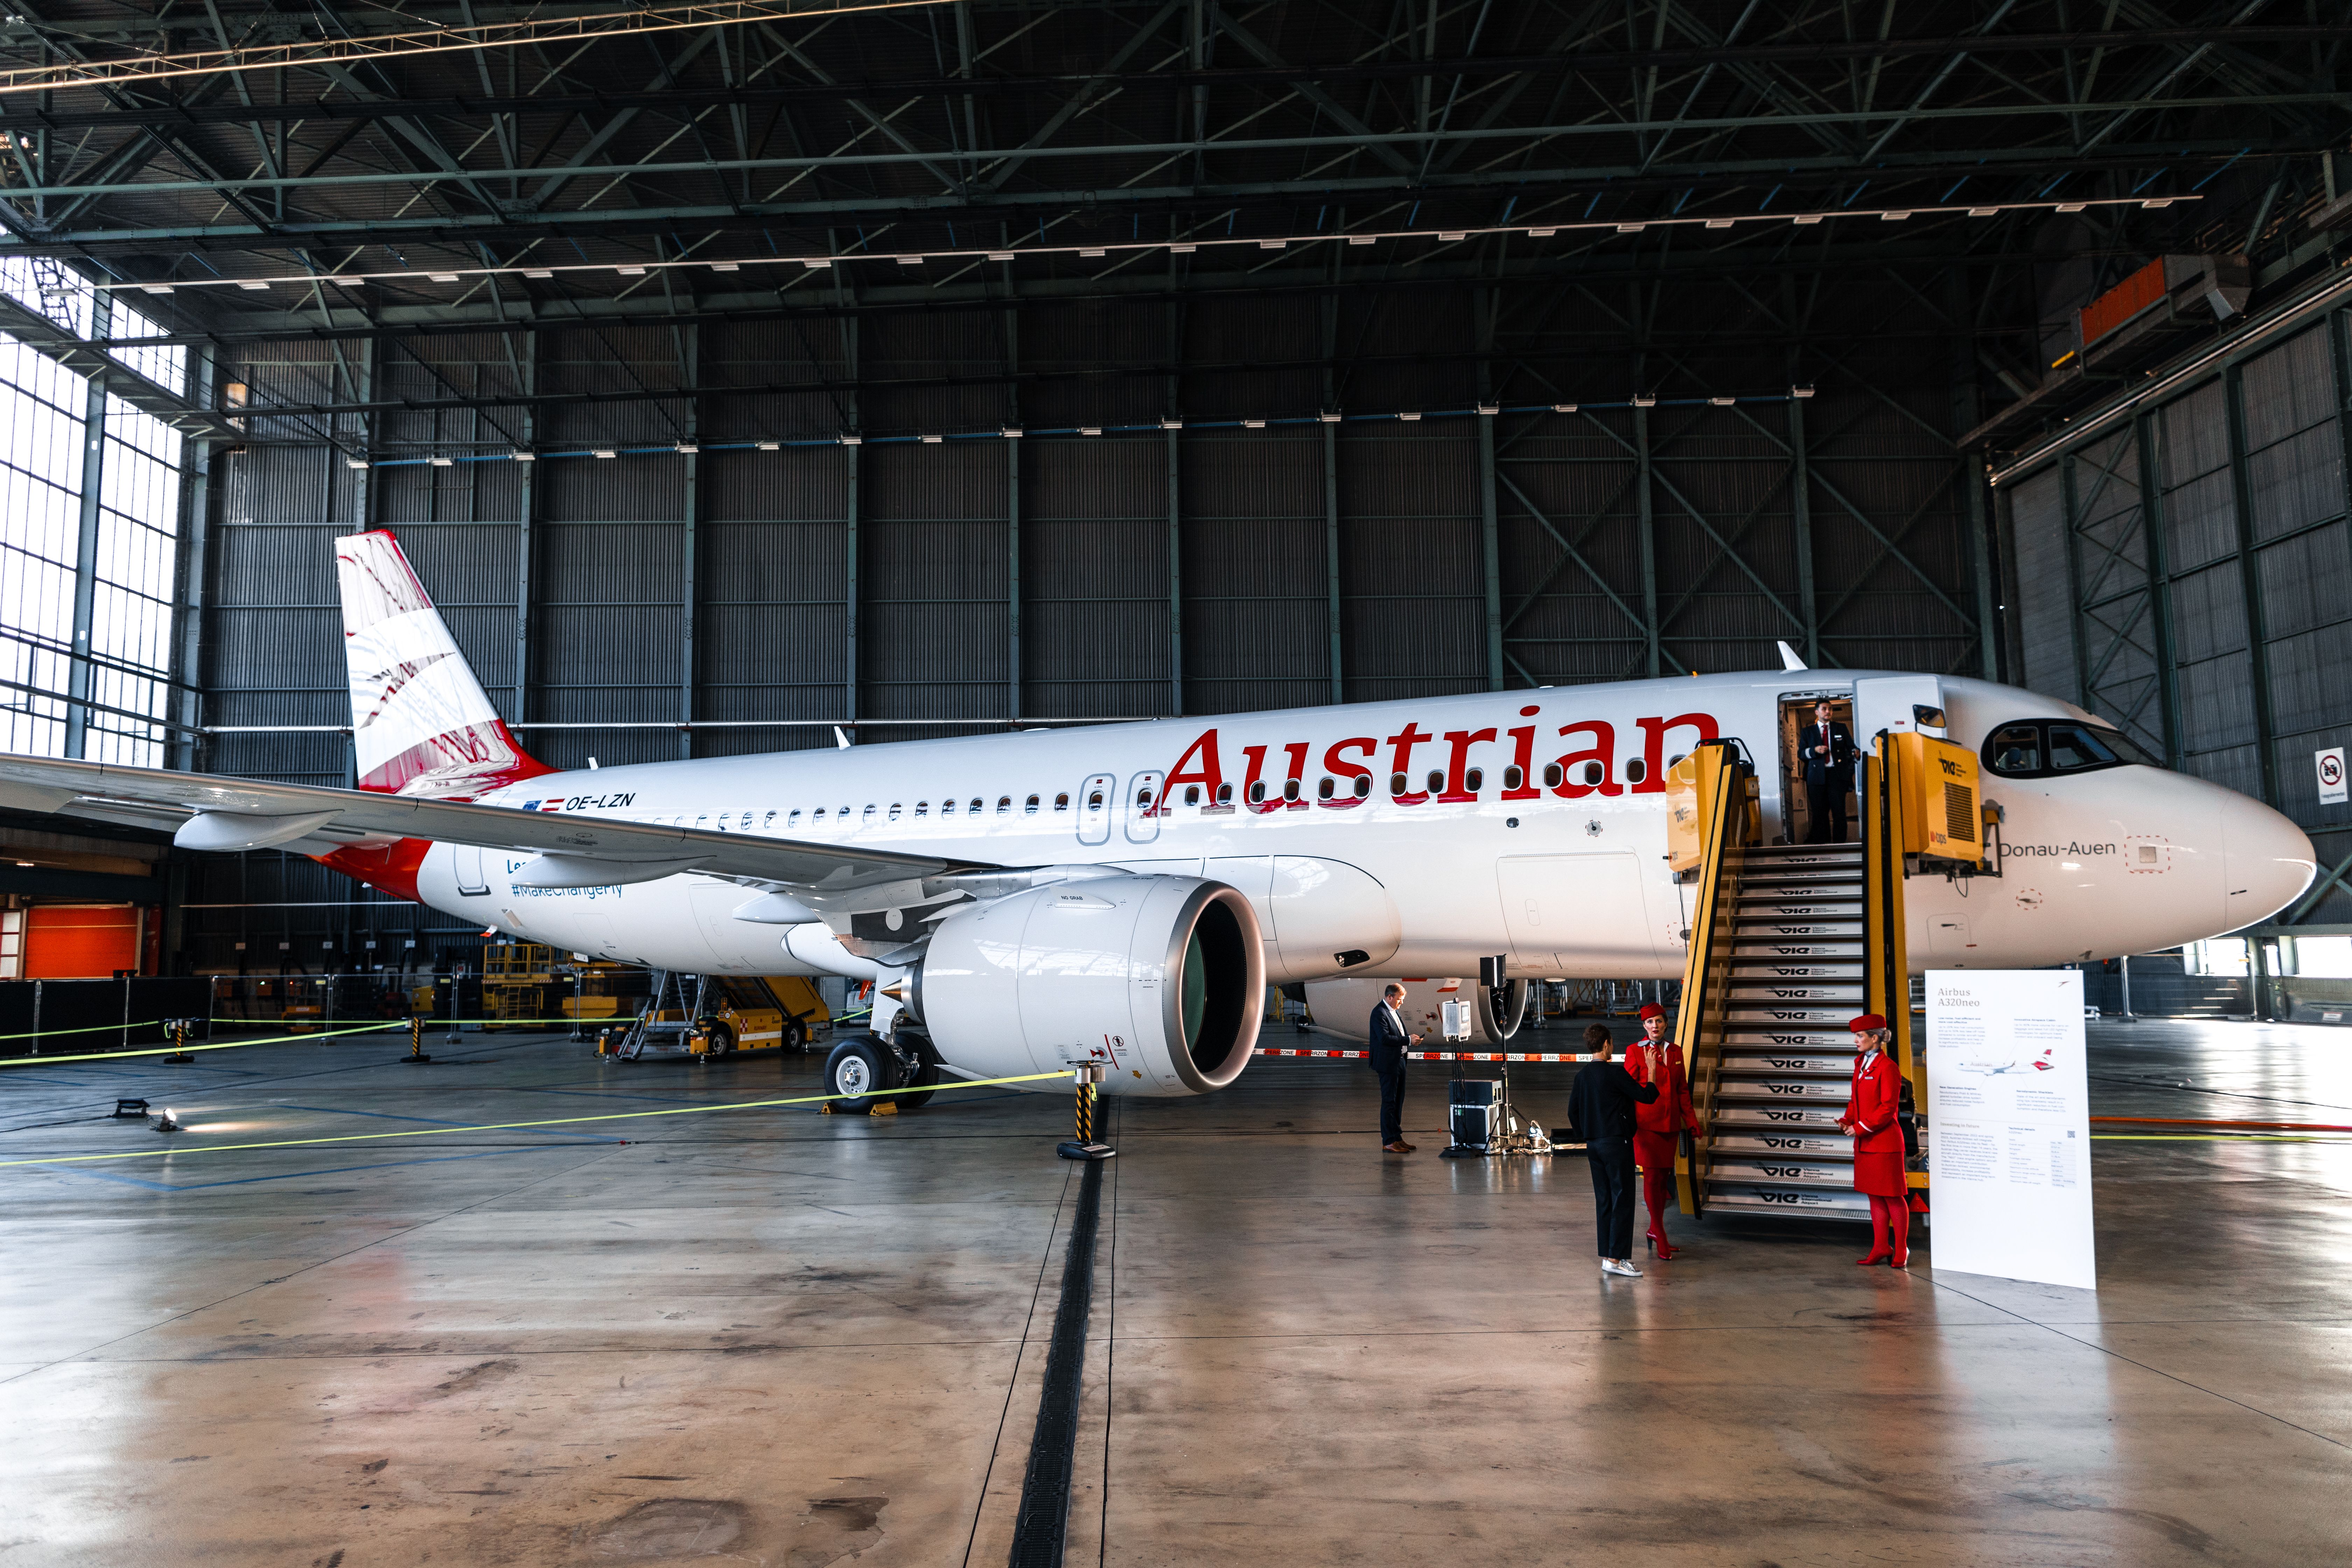 Austrian Airlines A320neo in the hangar.